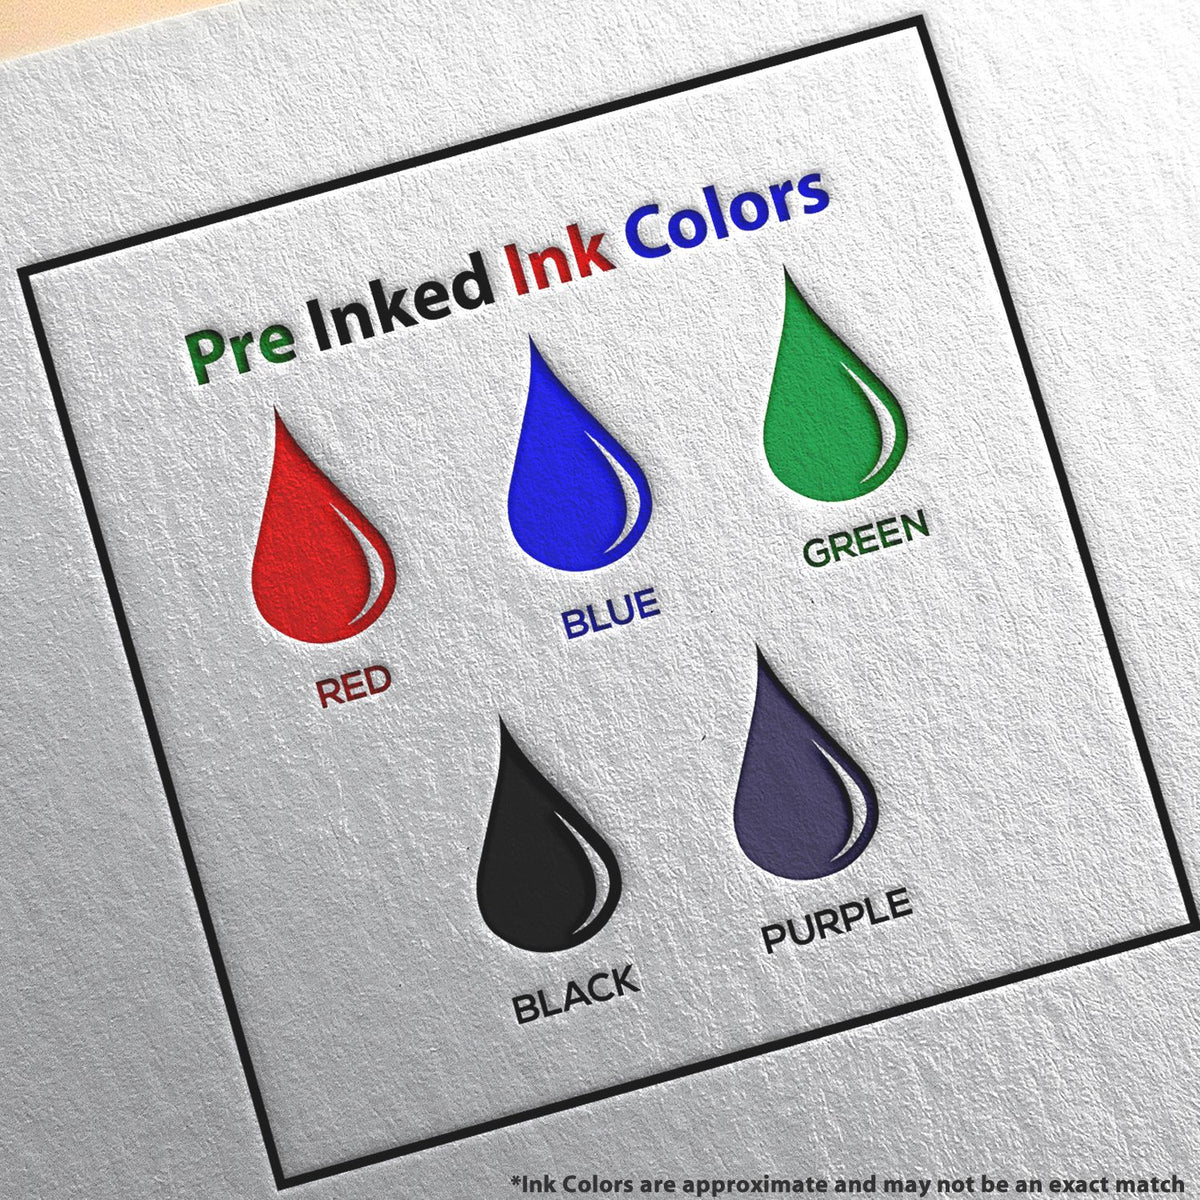 A picture showing the different ink colors or hues available for the Premium MaxLight Pre-Inked Kansas Landscape Architectural Stamp product.